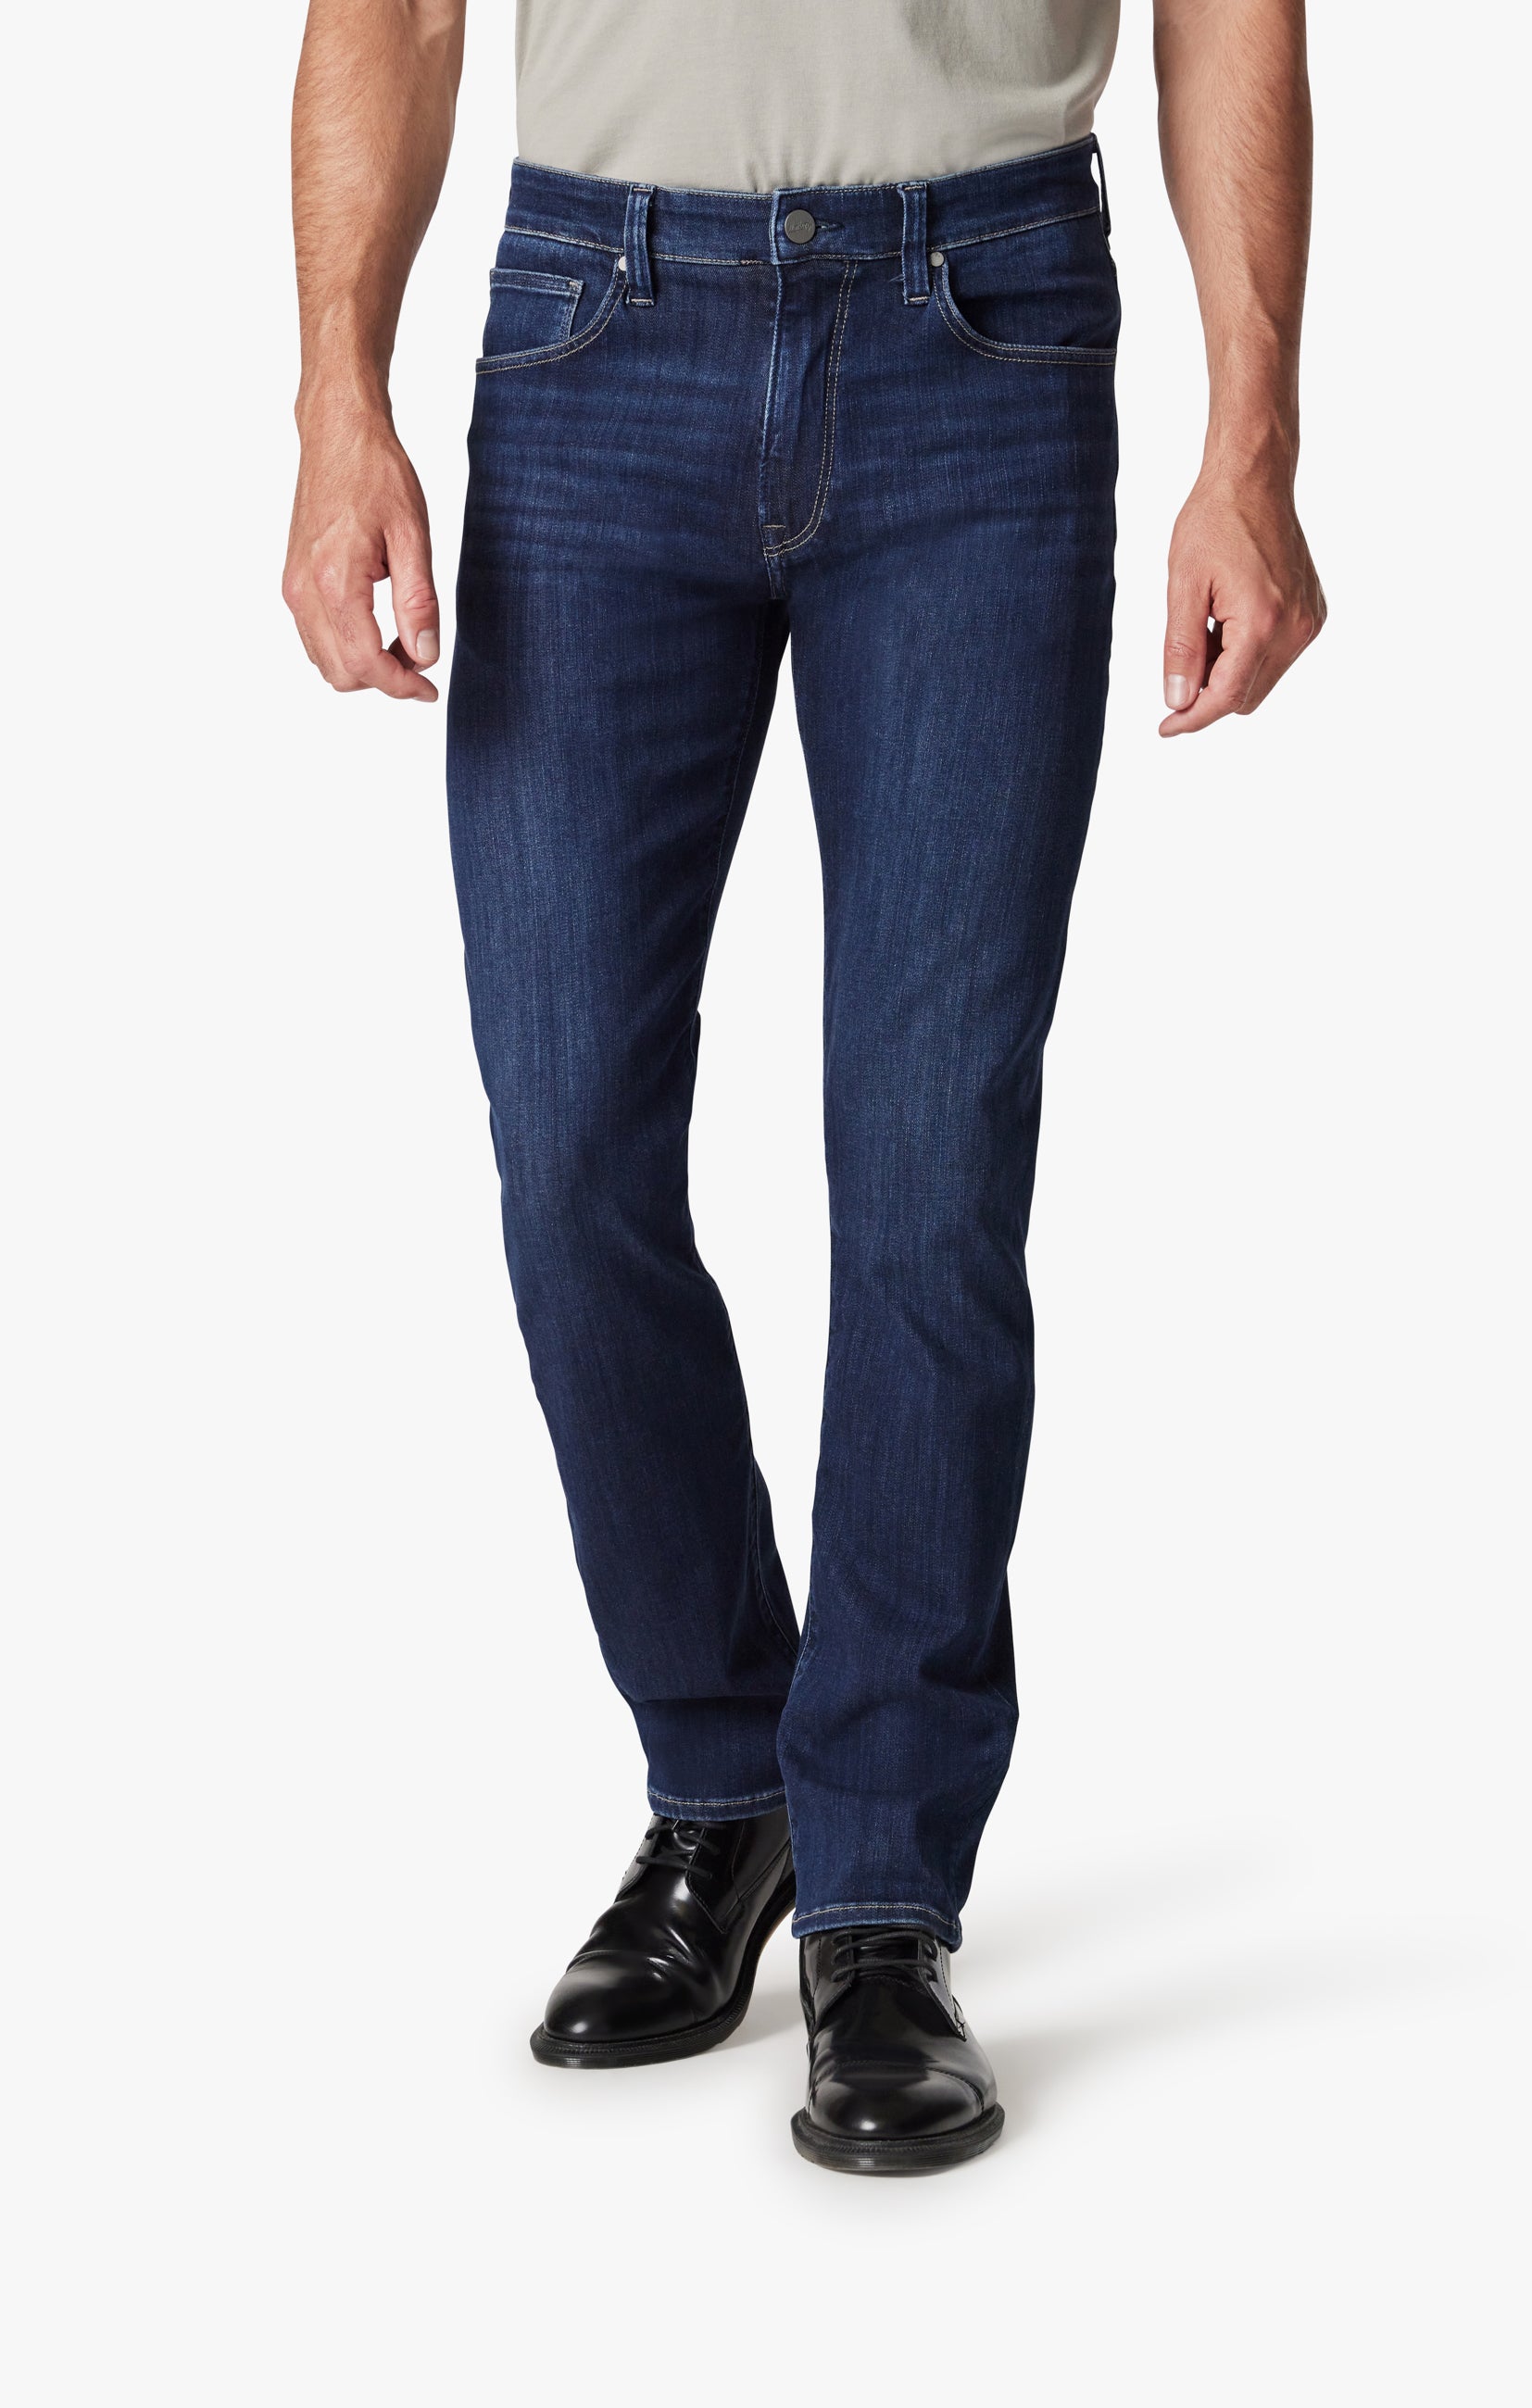 Champ Athletic Fit Jeans in Dark Brushed Refined Image 3